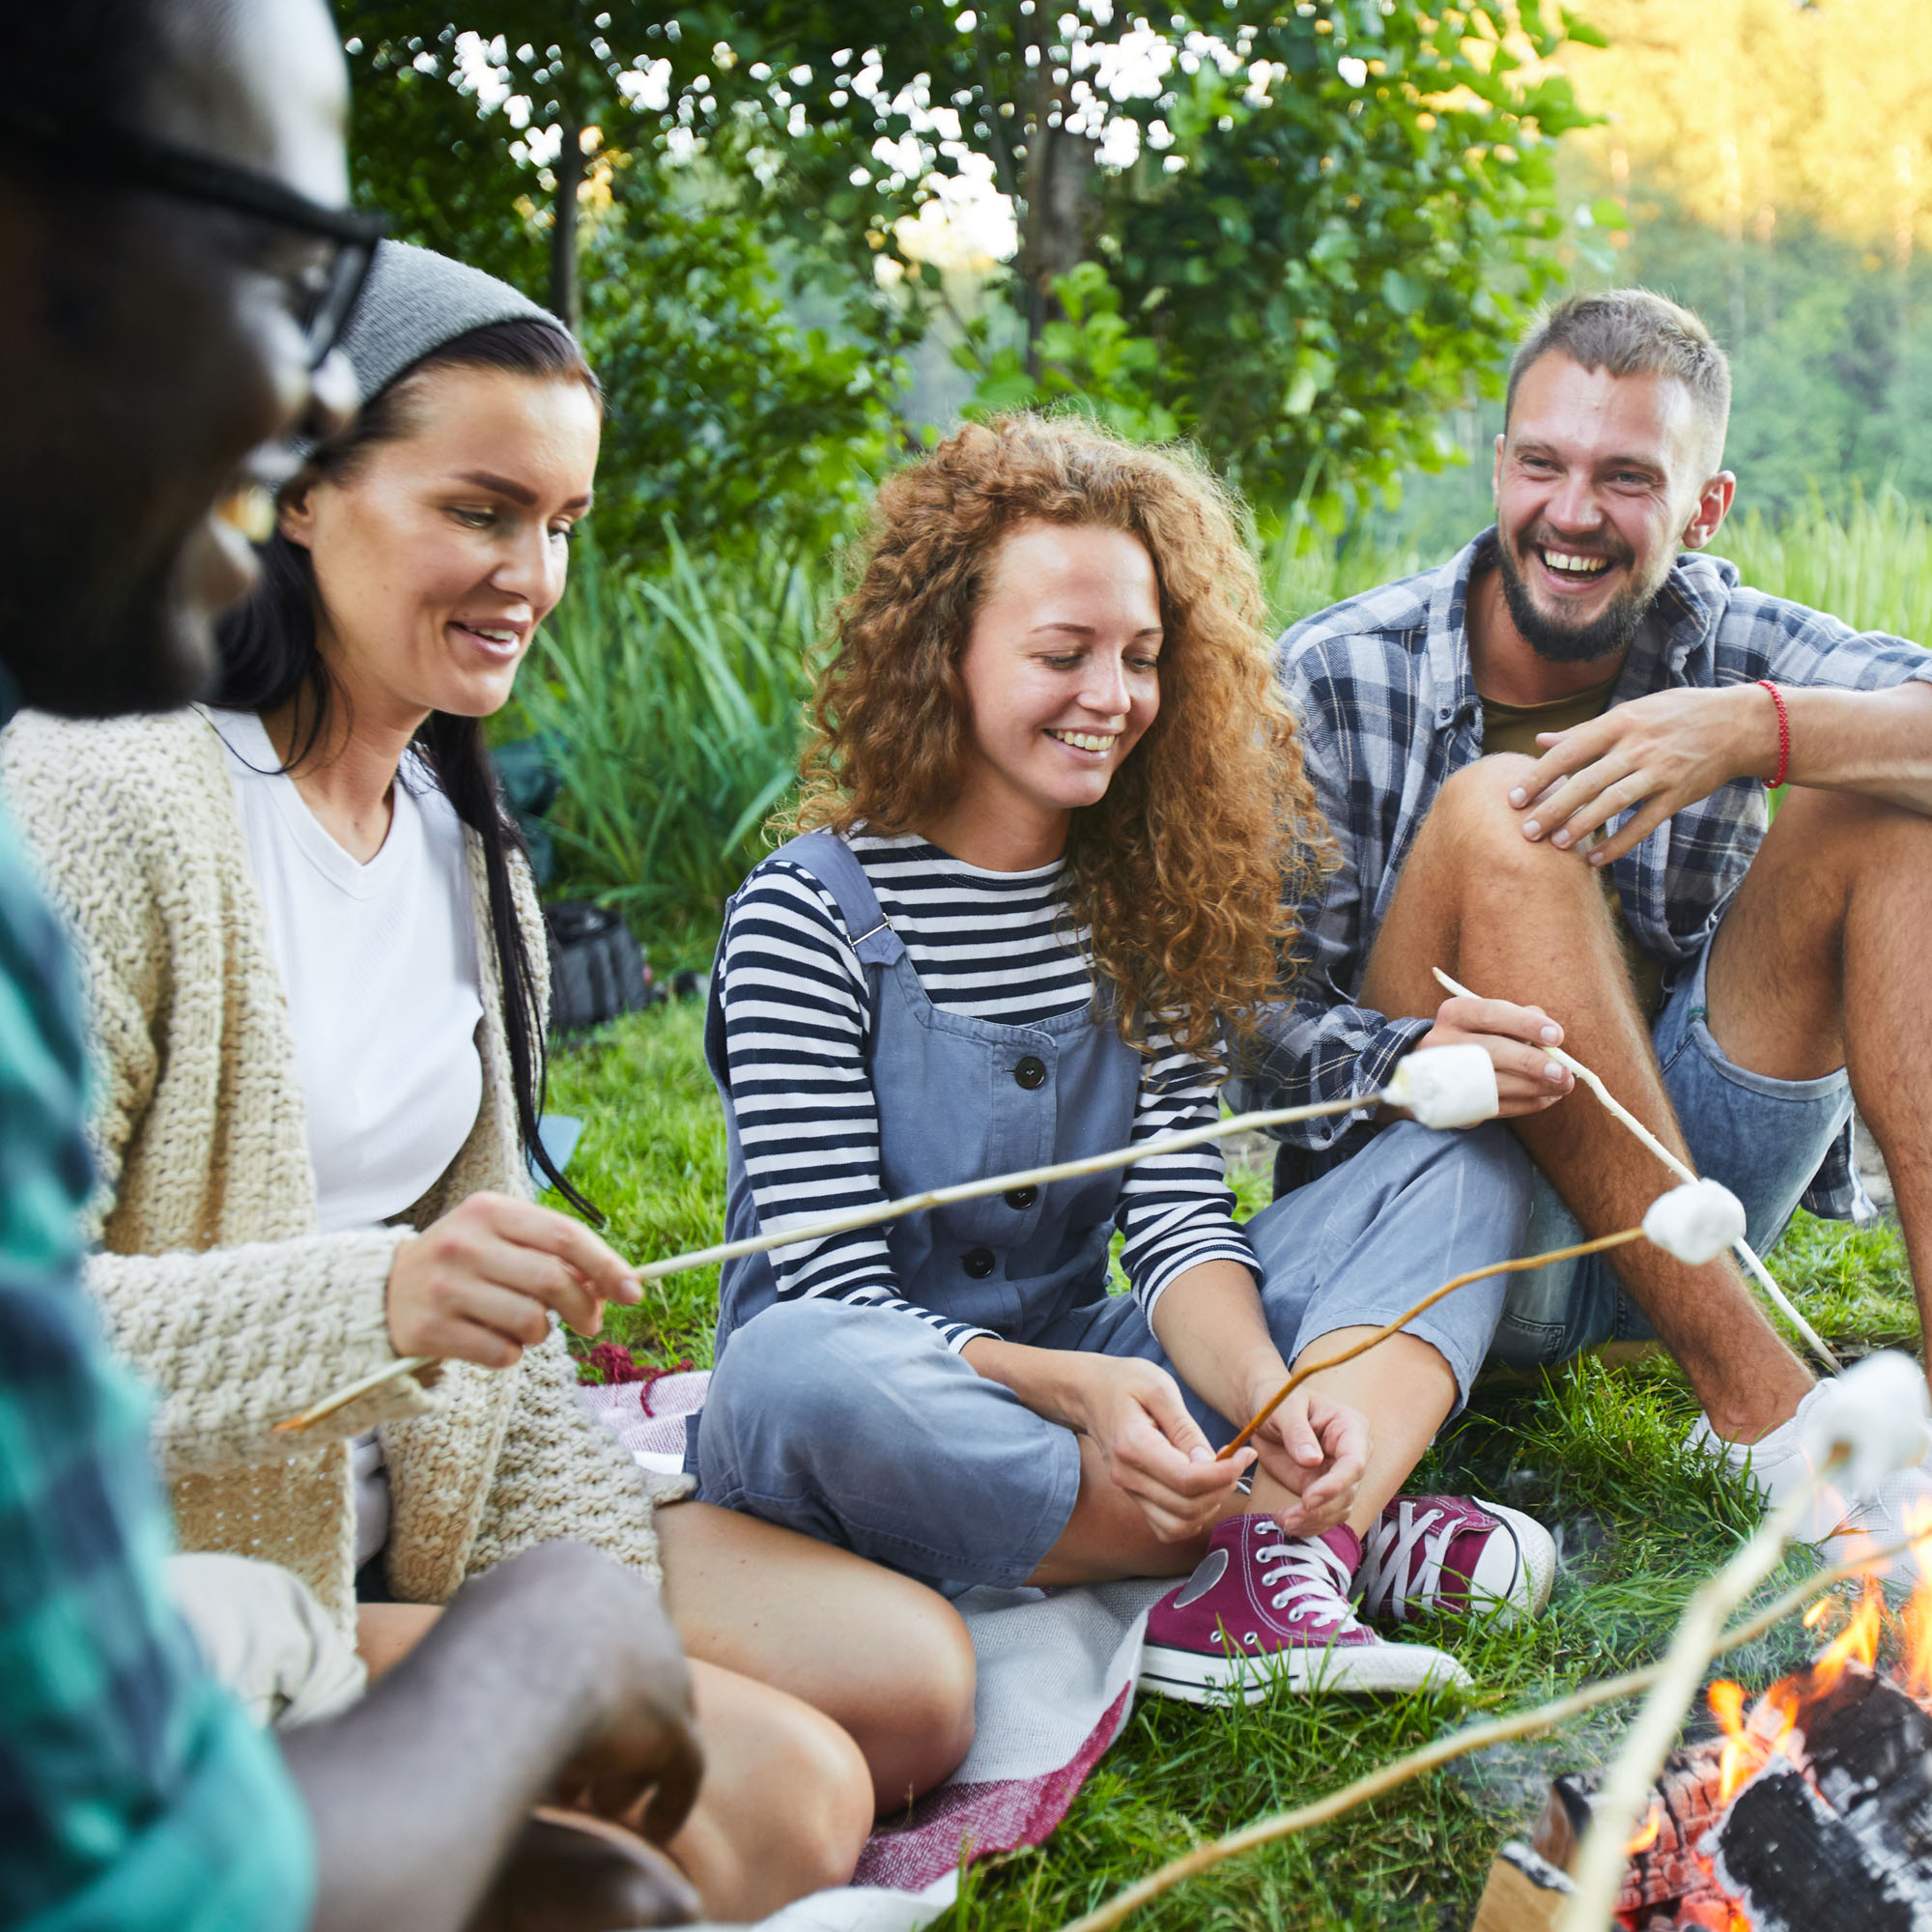 Keeping Your Friends & Family Safe While Camping: Tips from Prudential Alarm